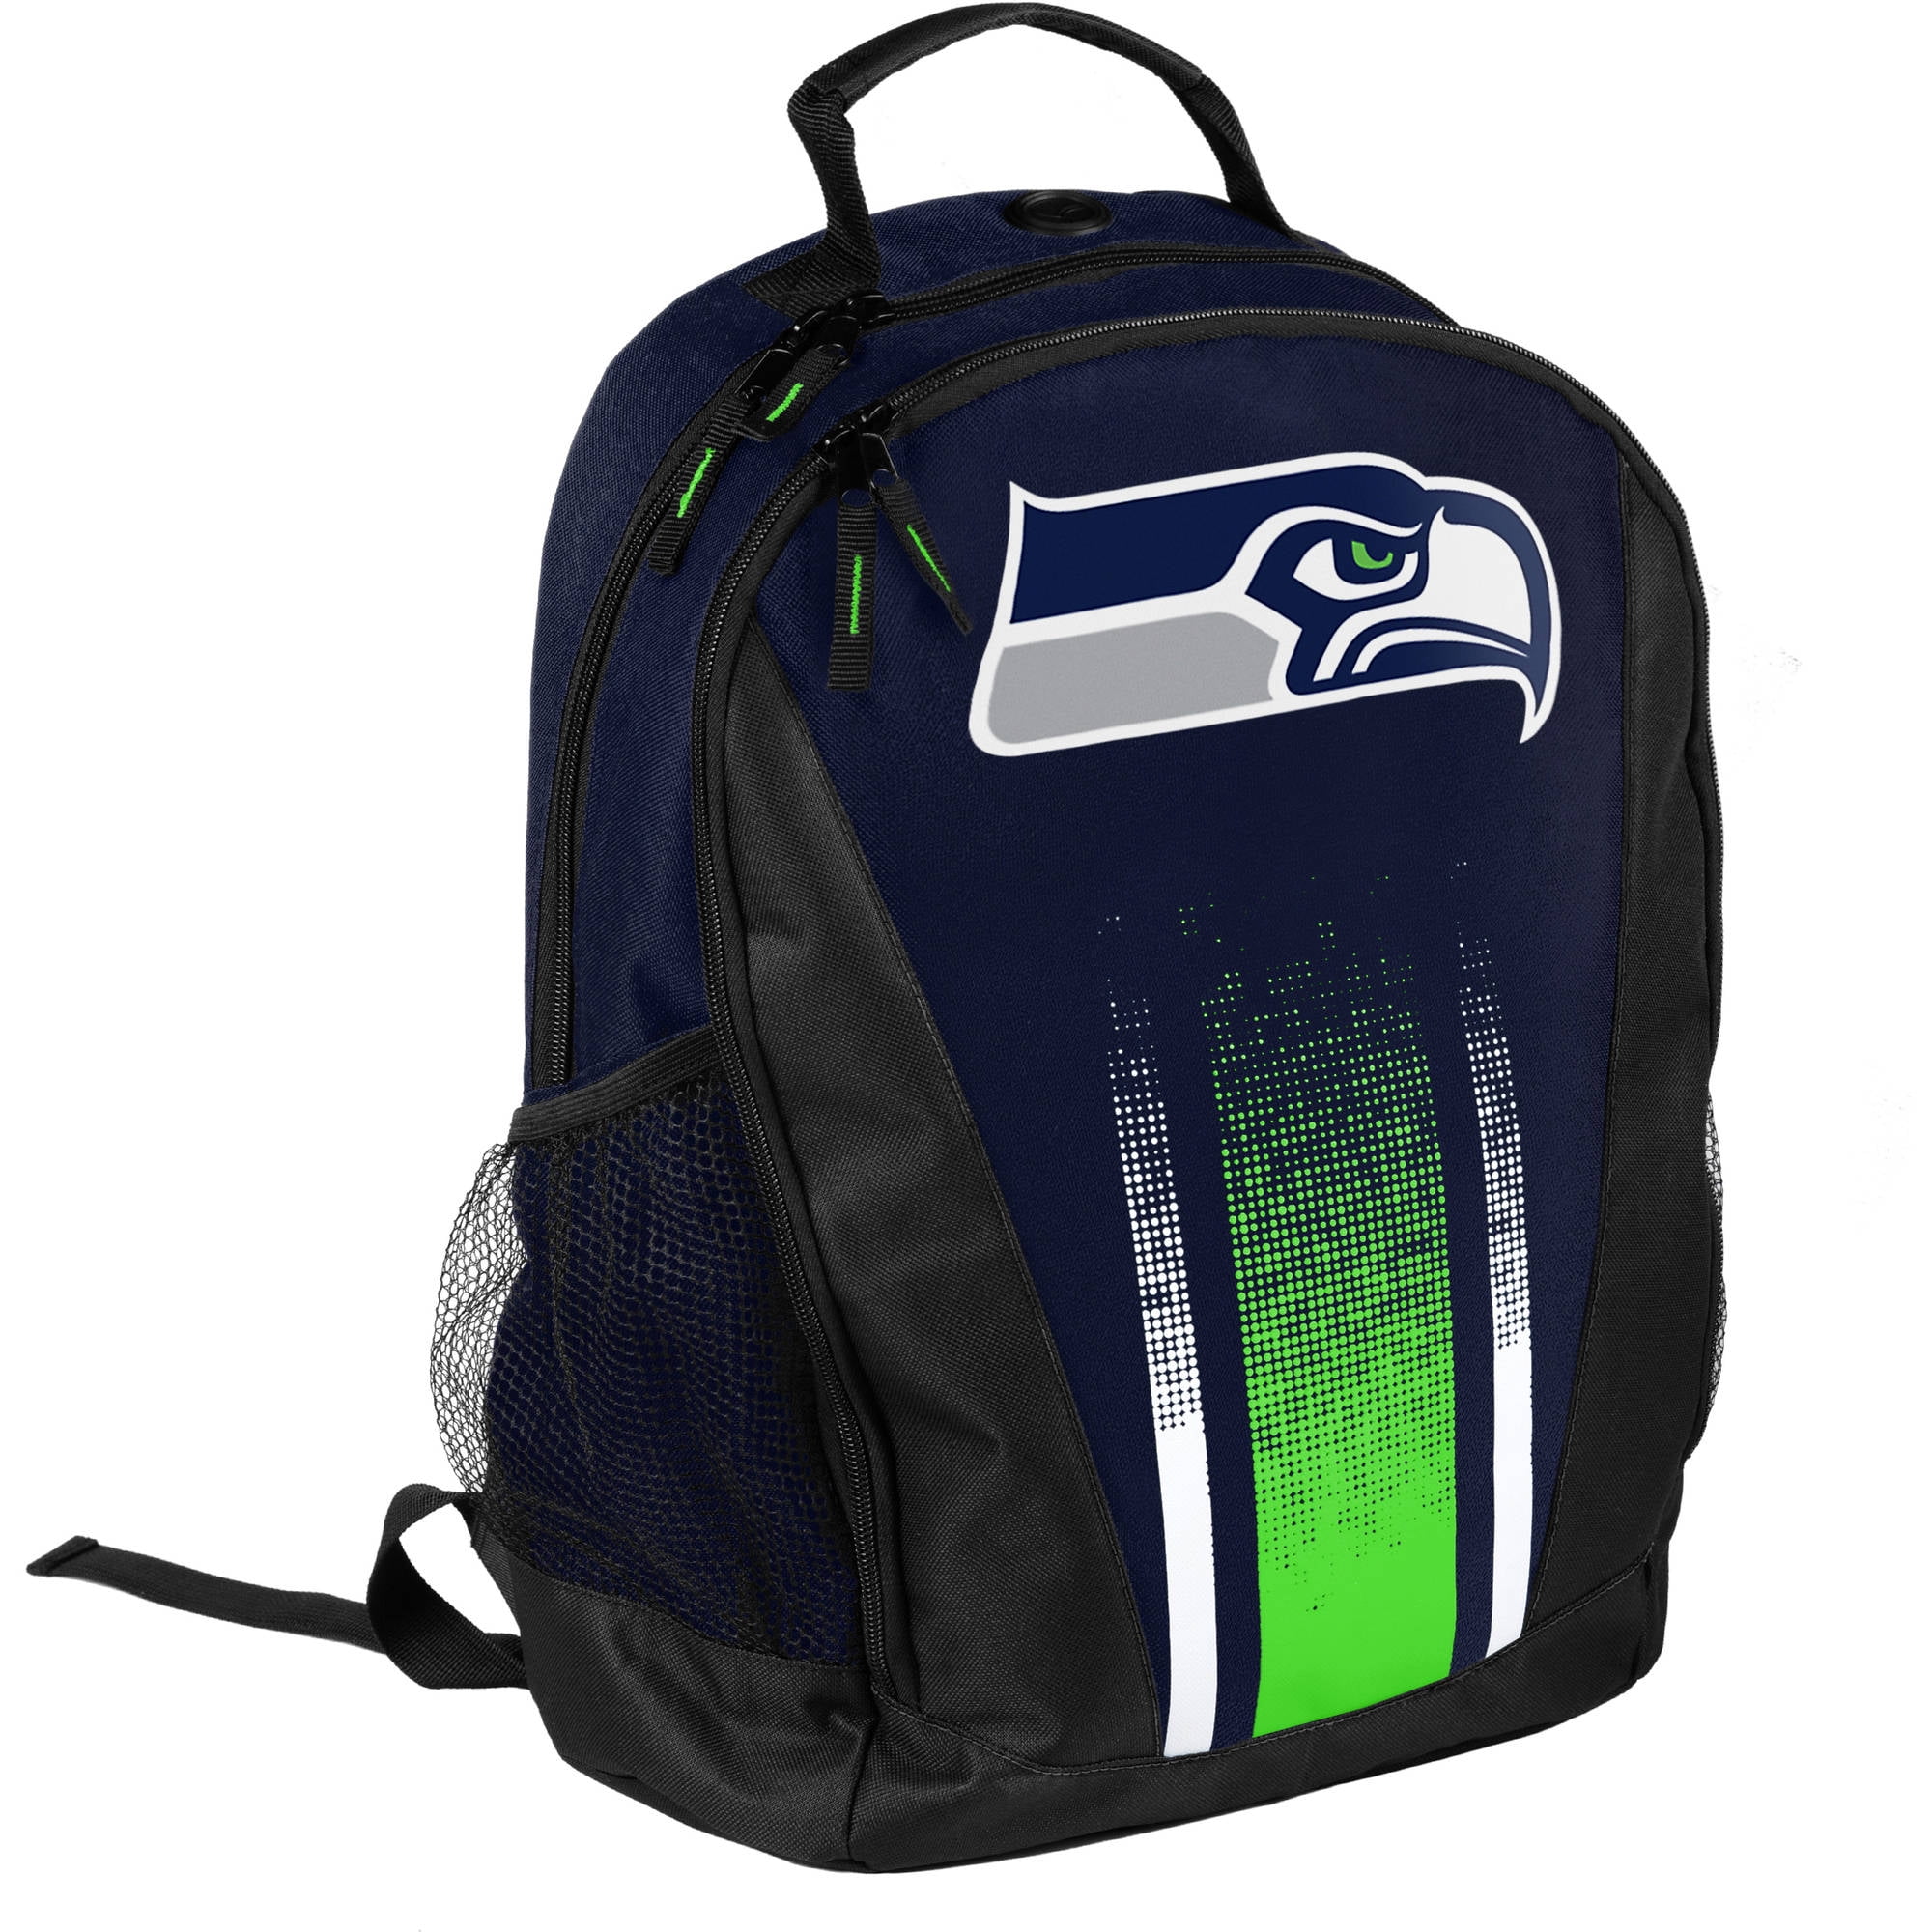 Forever Collectibles NFL Seattle Seahawks Prime Backpack - Walmart.com